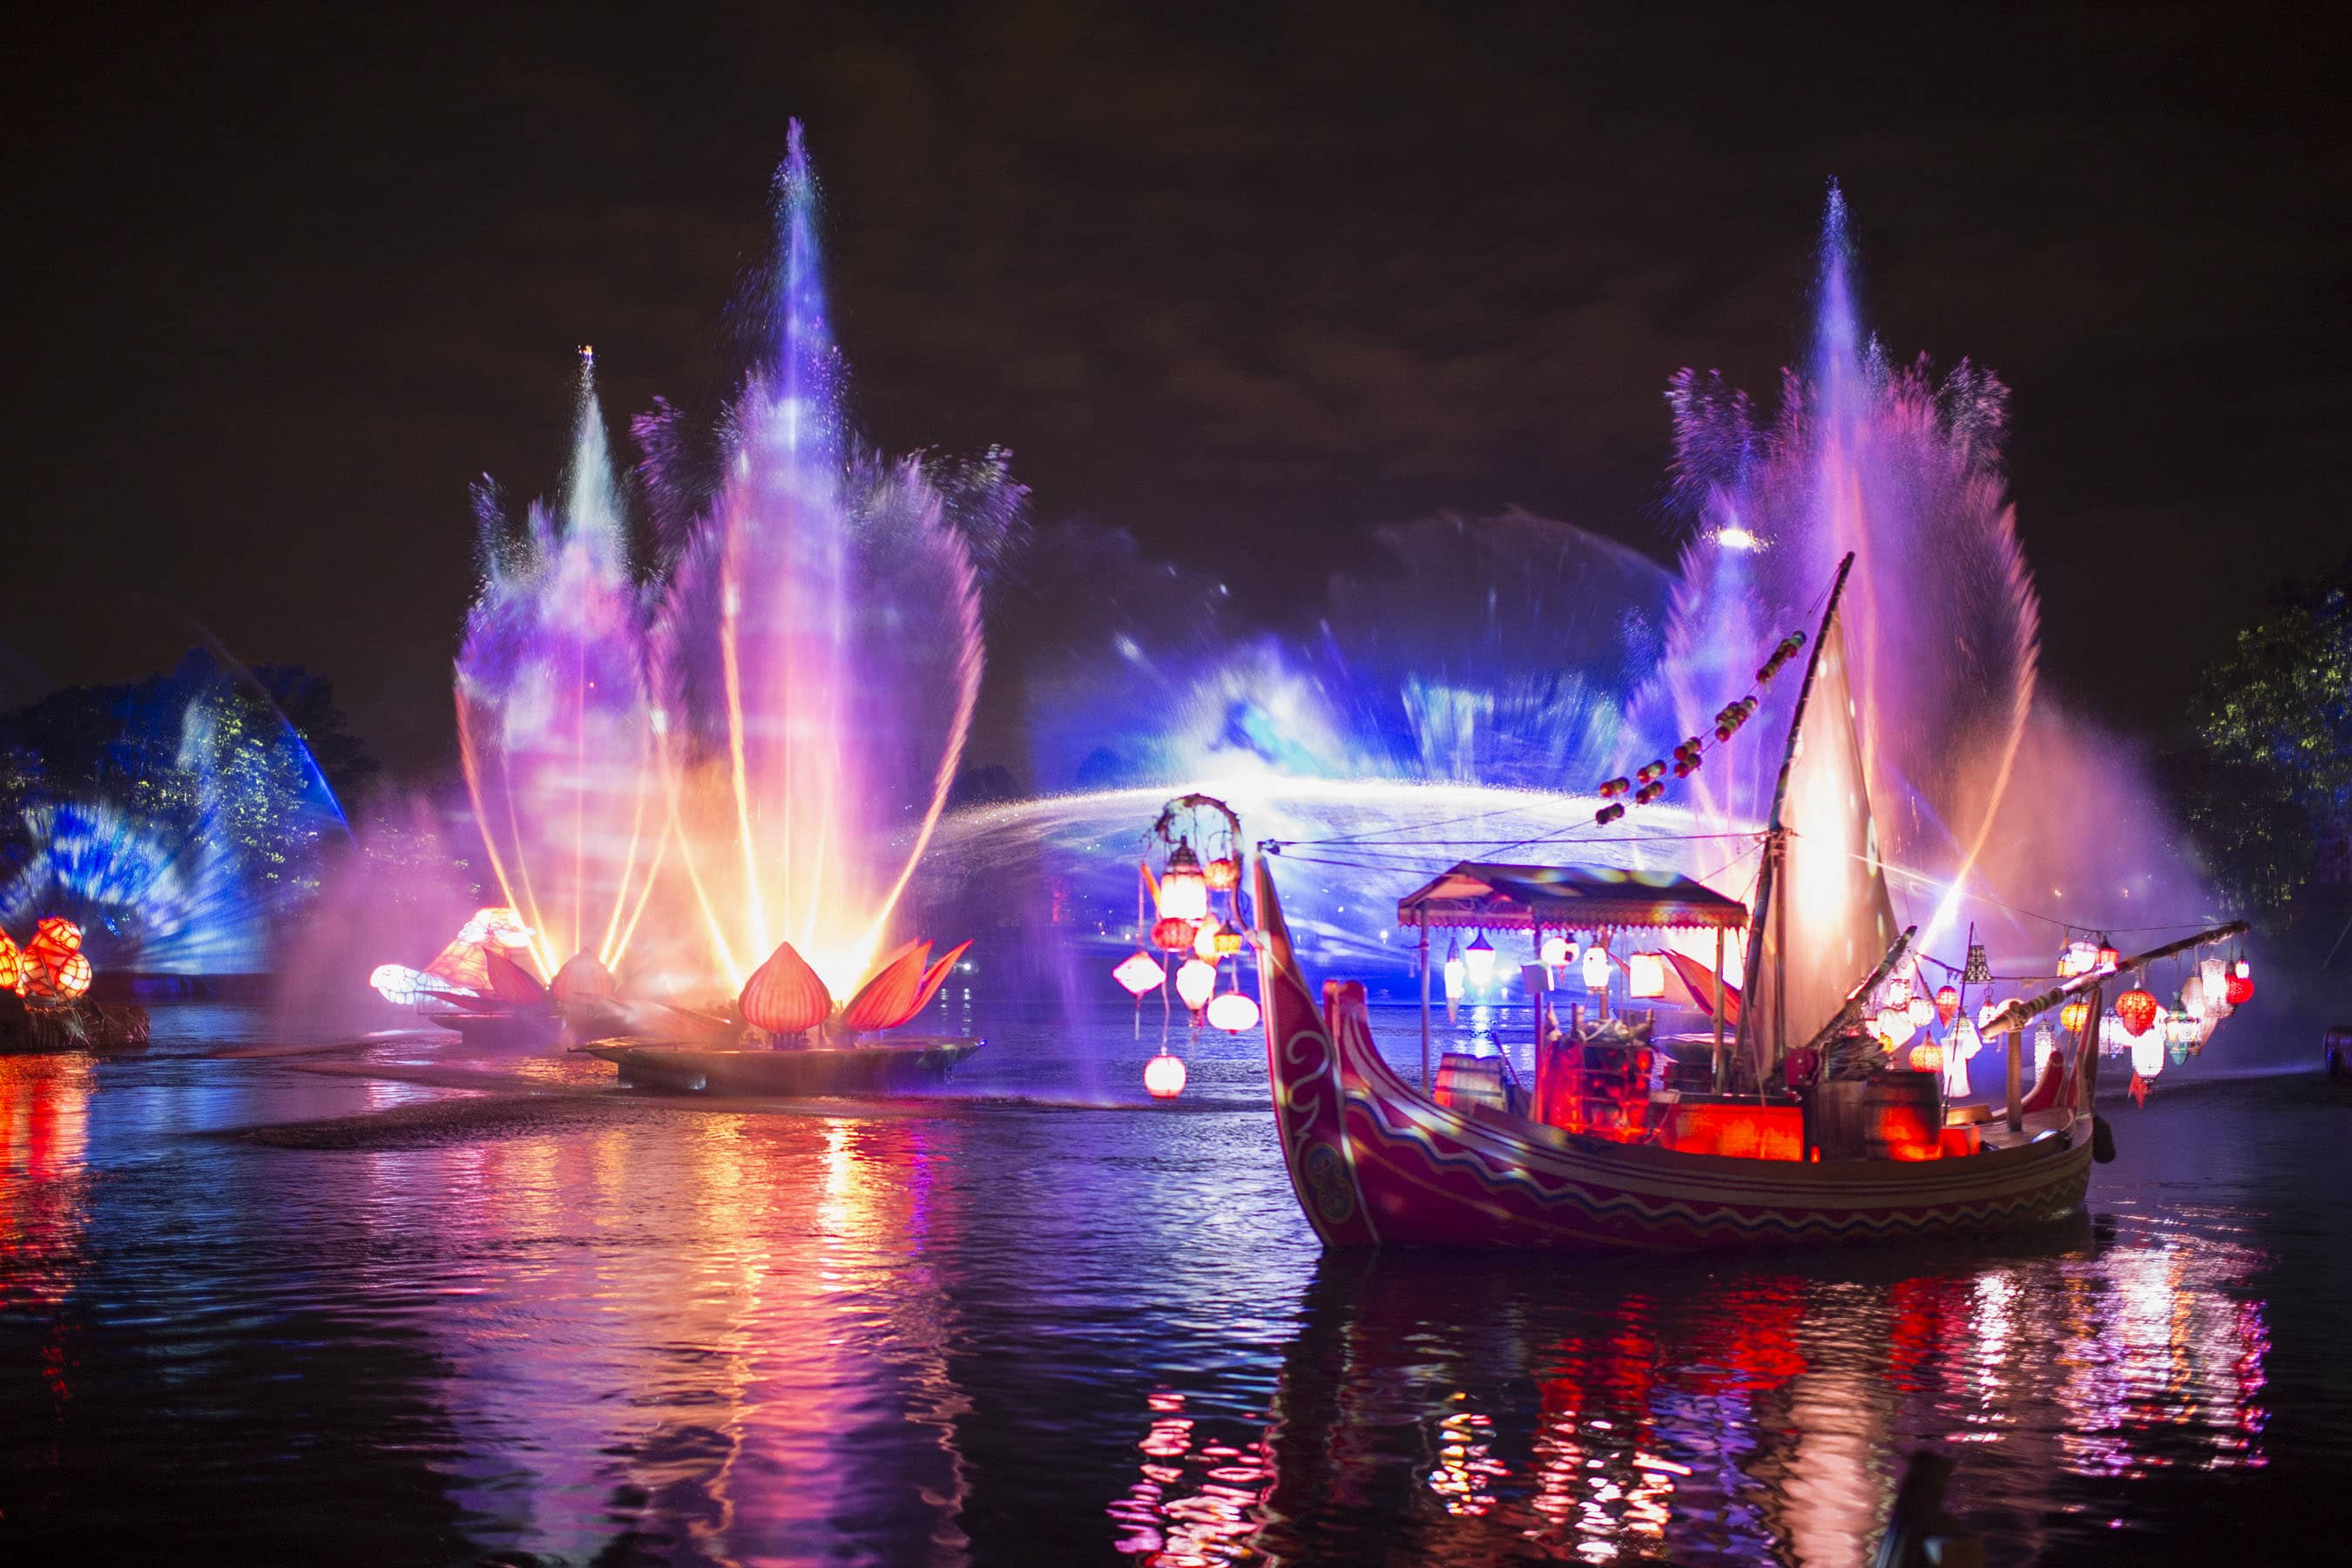 "Rivers of Light,"the majestic nighttime jewel, coming to Disney's Animal Kingdom creates an illuminating musical experience for guests. Currently in development with a premiere date to be announced soon, "Rivers of Light" will celebrate the magic of animals, humans and the natural world with a blend of performers, floating lanterns and theatrical animal imagery. (David Roark, photographer at Walt Disney World Resort Animal Kingdom)